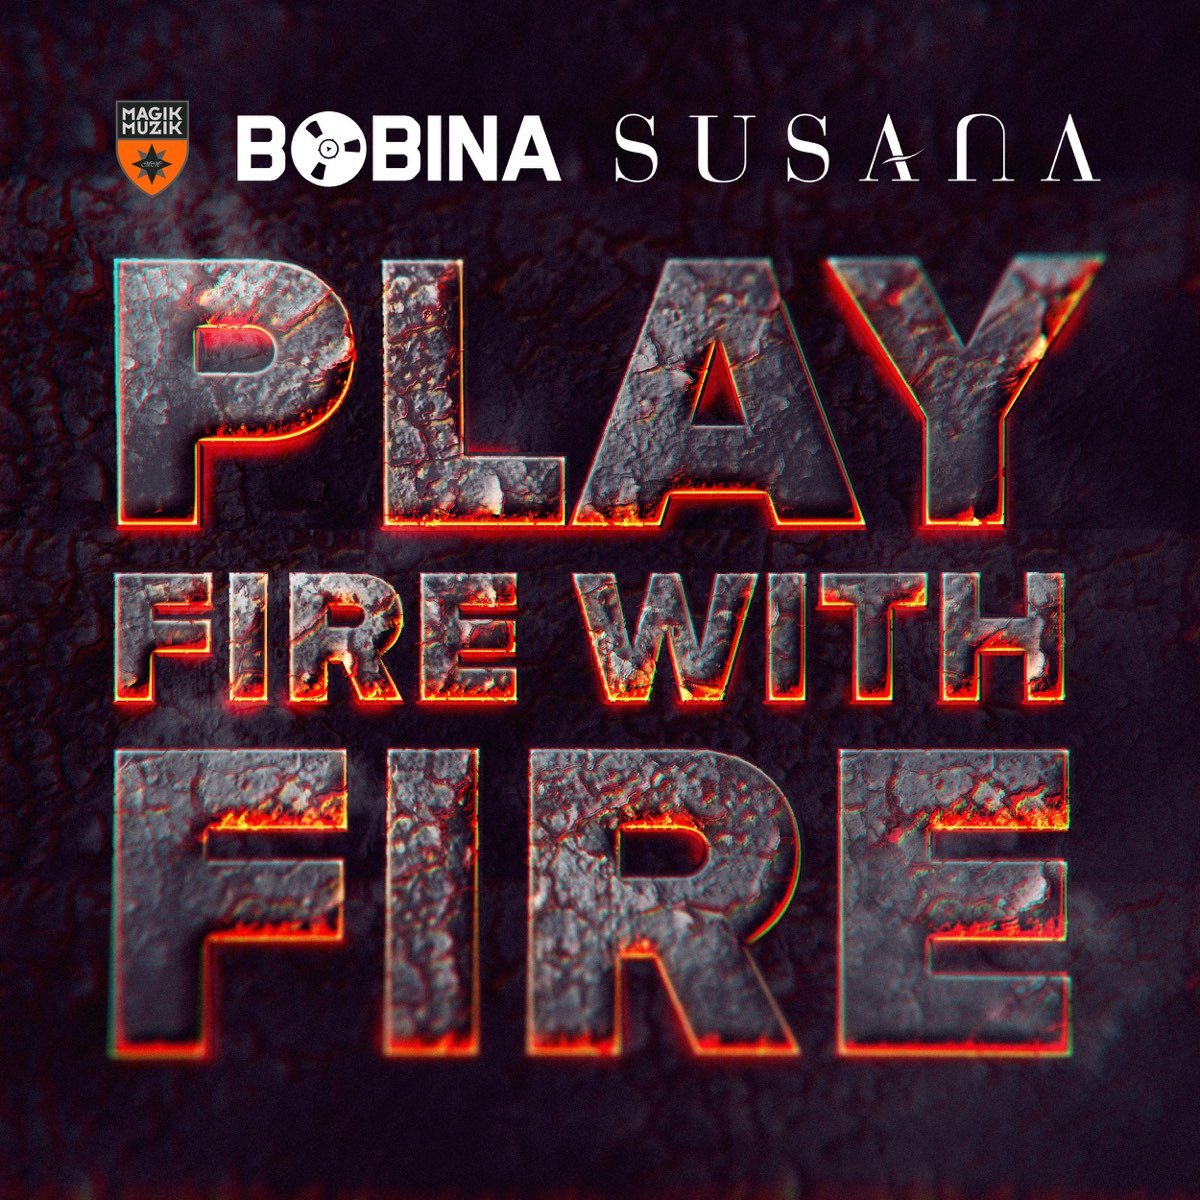 Play with fire на русском. With Fire. Fire with Fire. Песня Play with Fire. Fire Play картинки.